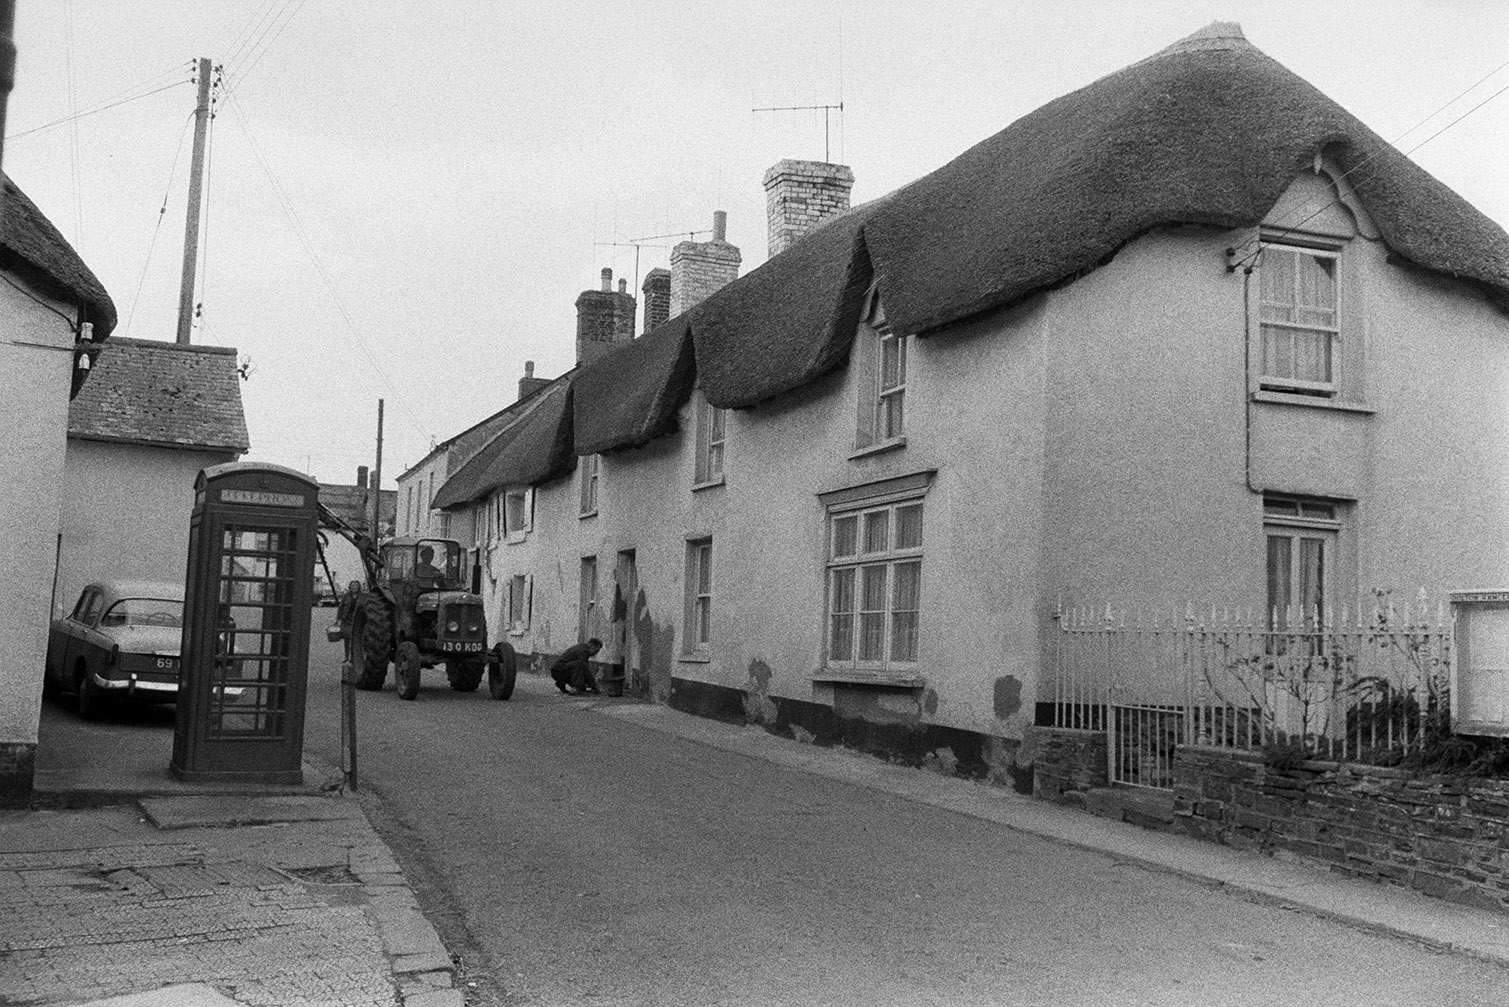 A tractor driving down Fore Street, Dolton. Thatched cottages and a telephone box are visible in the street.